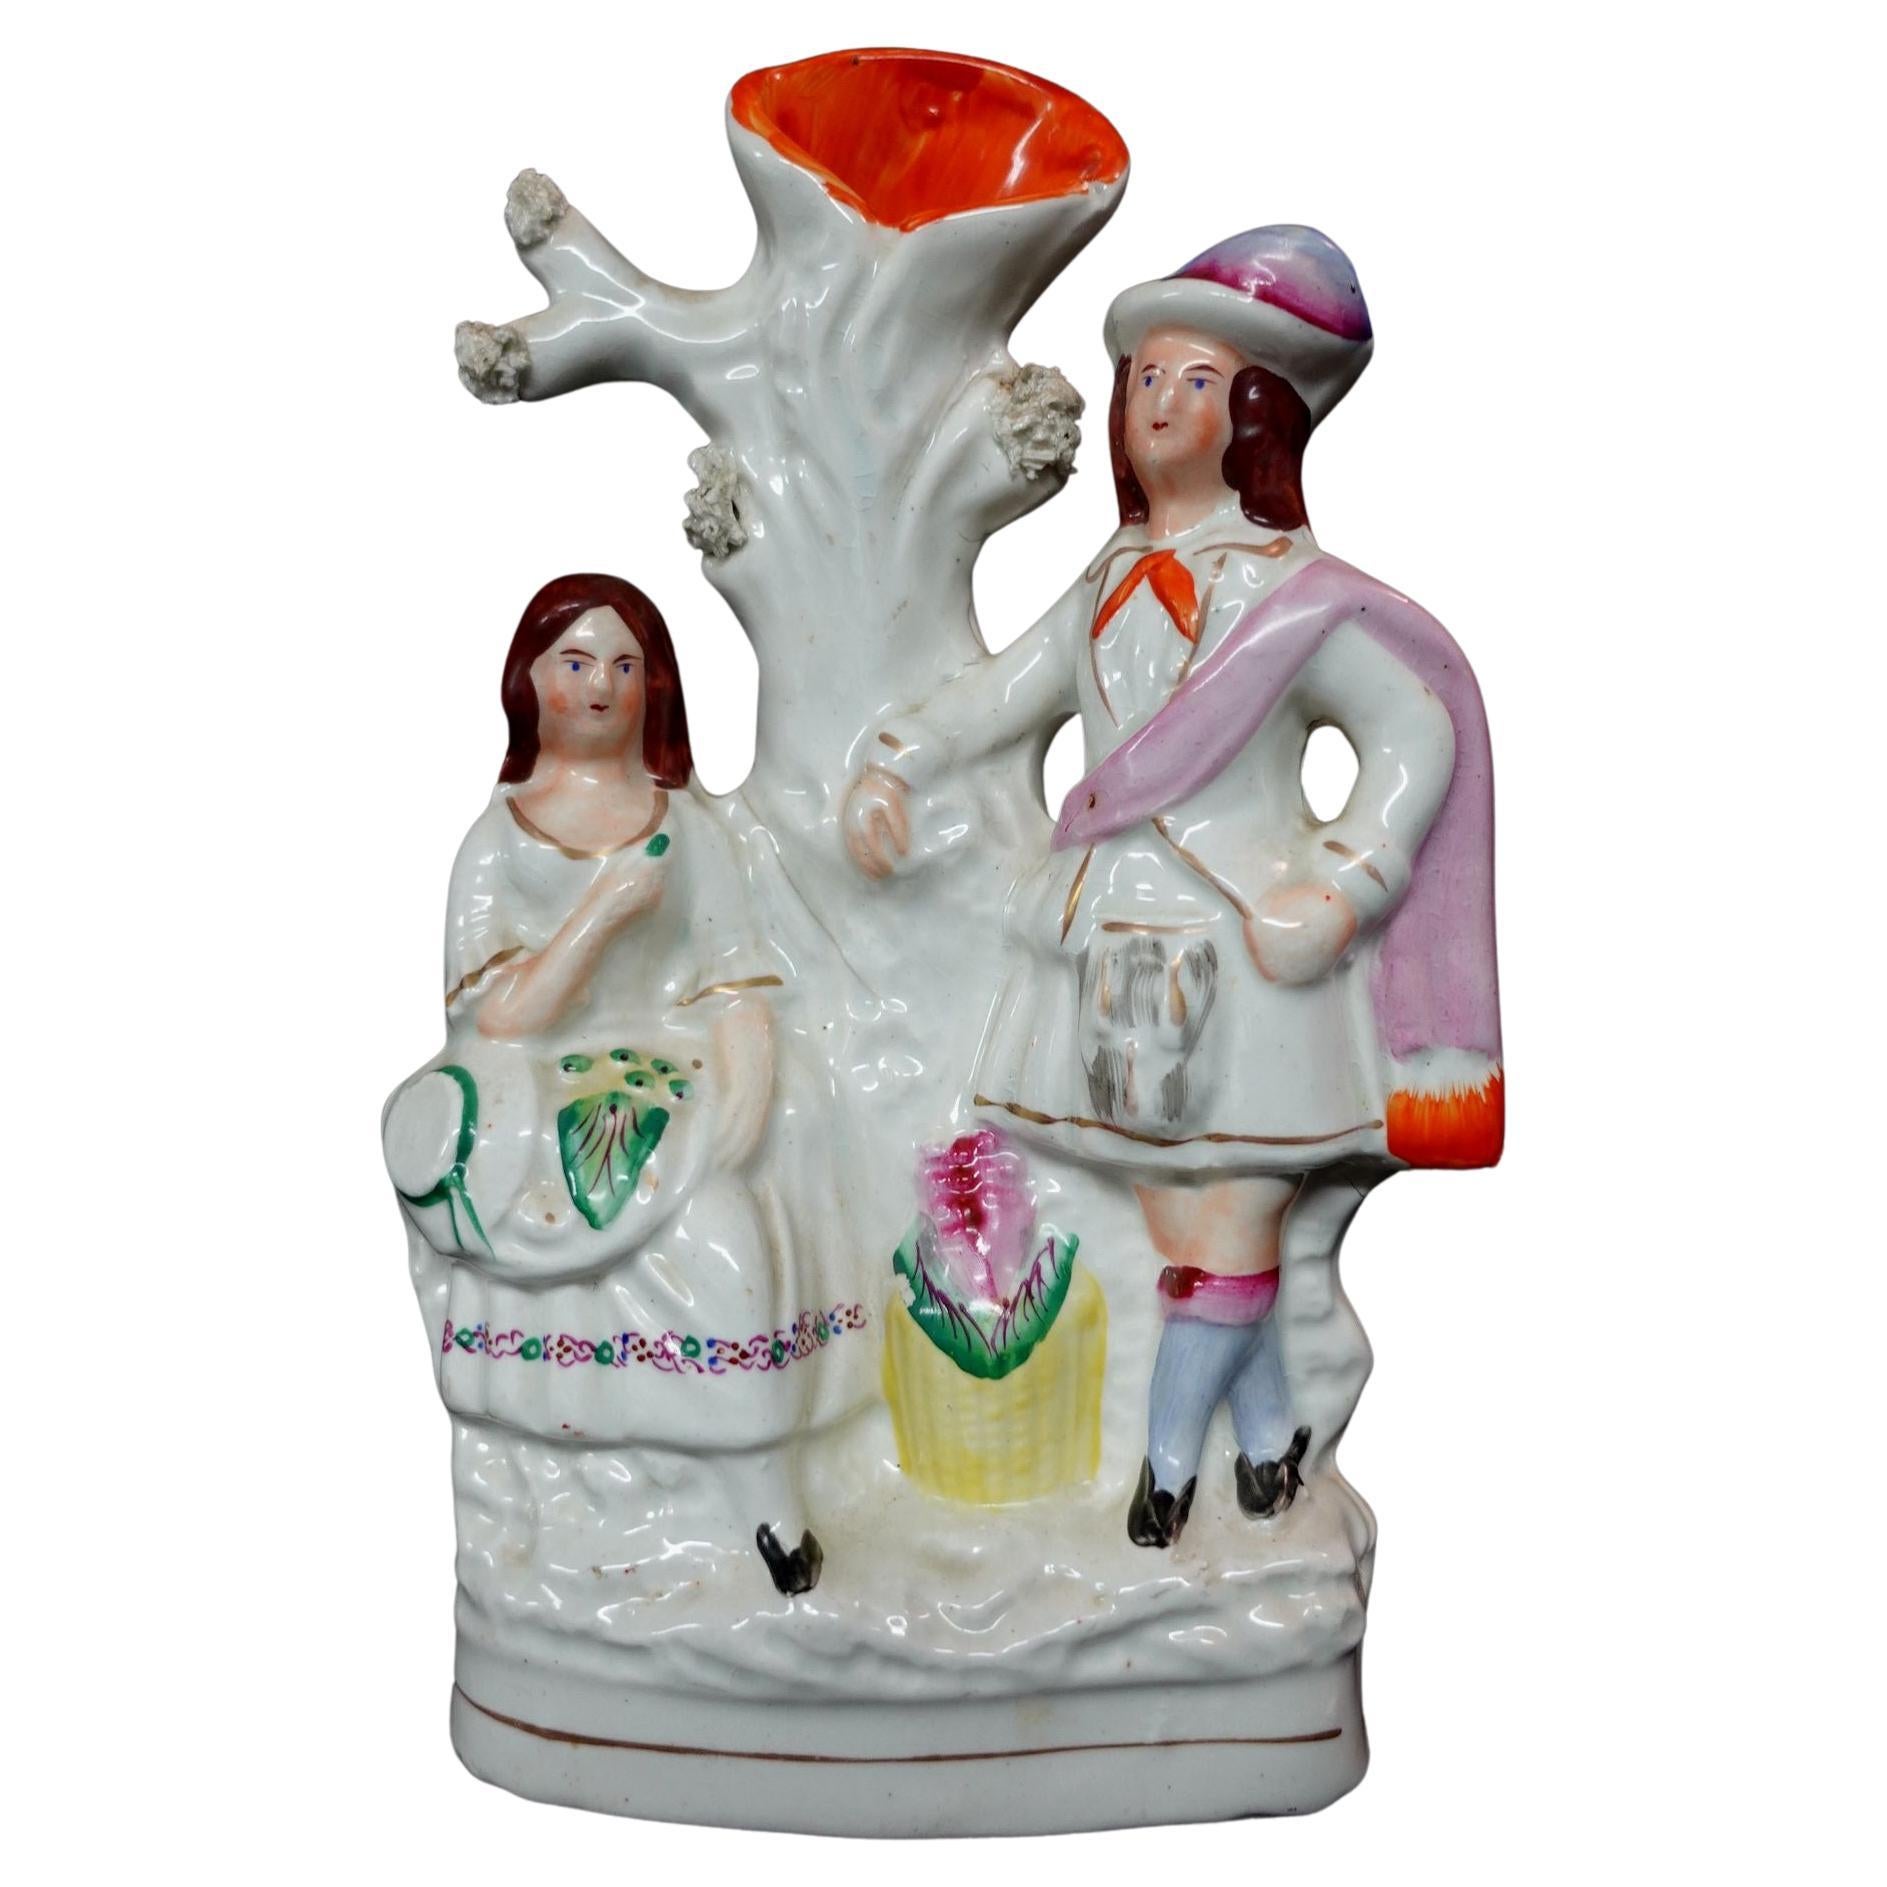 19th Century Large Staffordshire Figure #3 For Sale